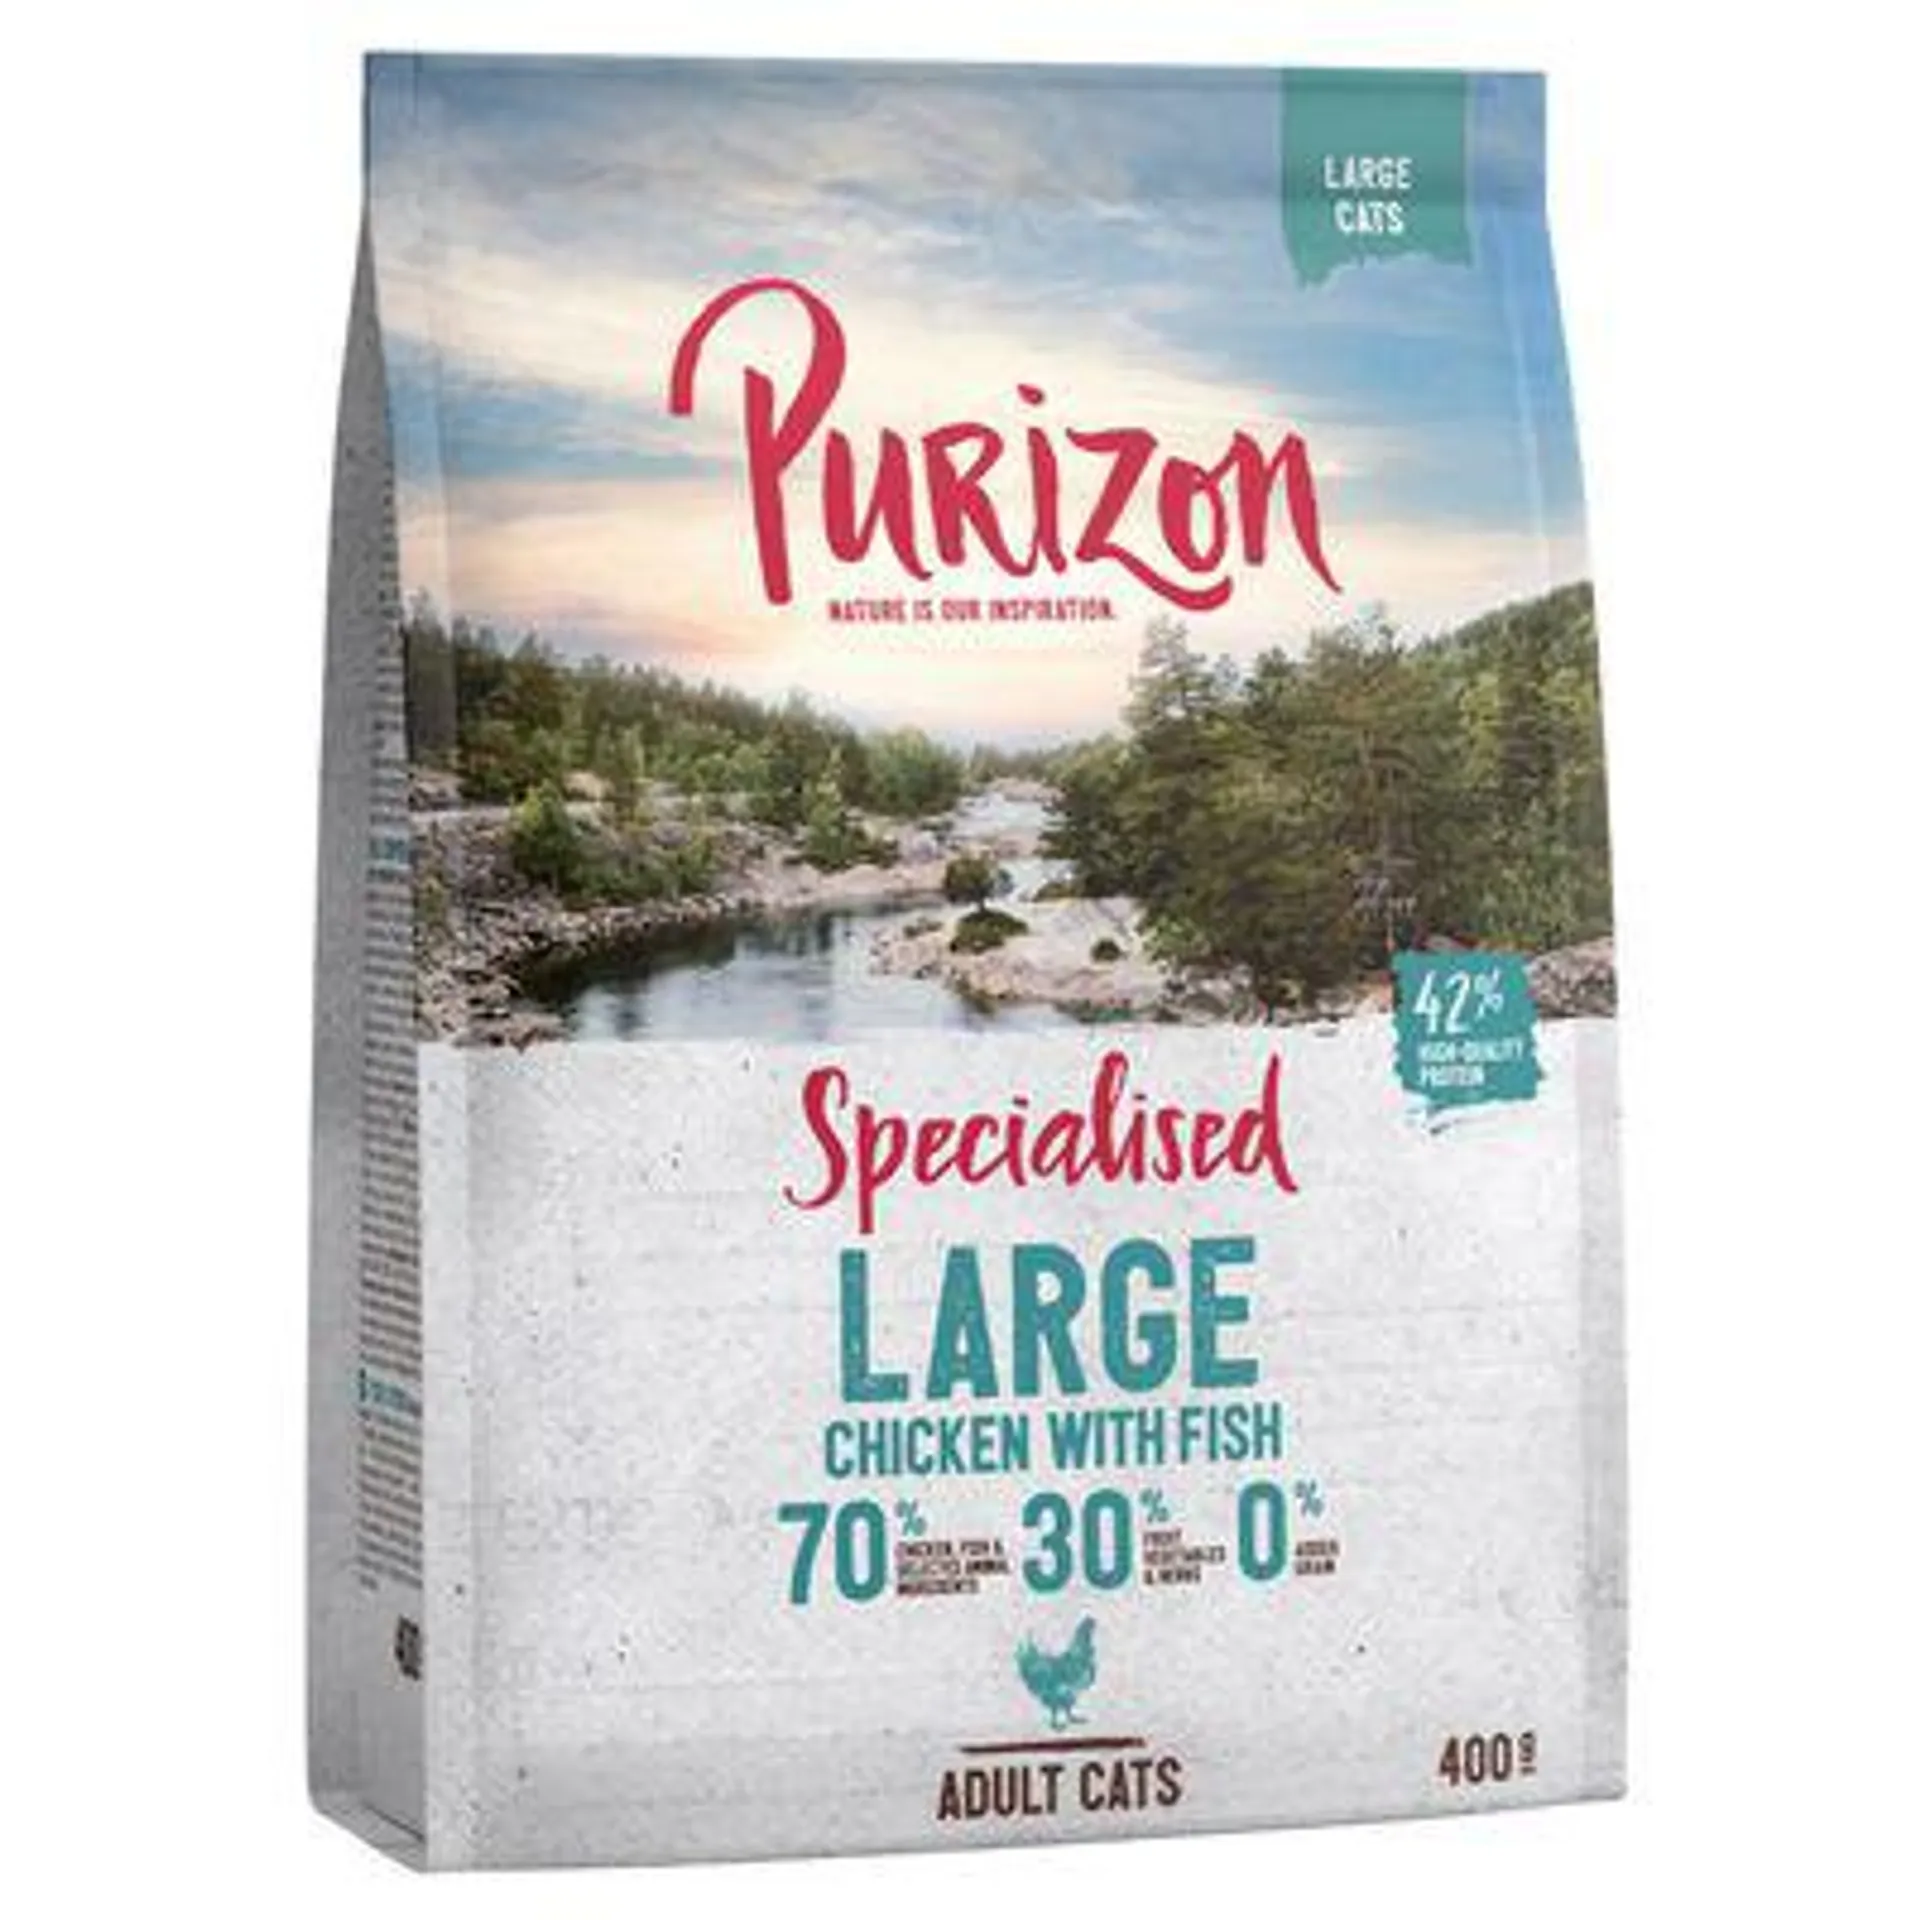 400g Purizon Kitten/Adult Dry Cat Food - Special Price!*